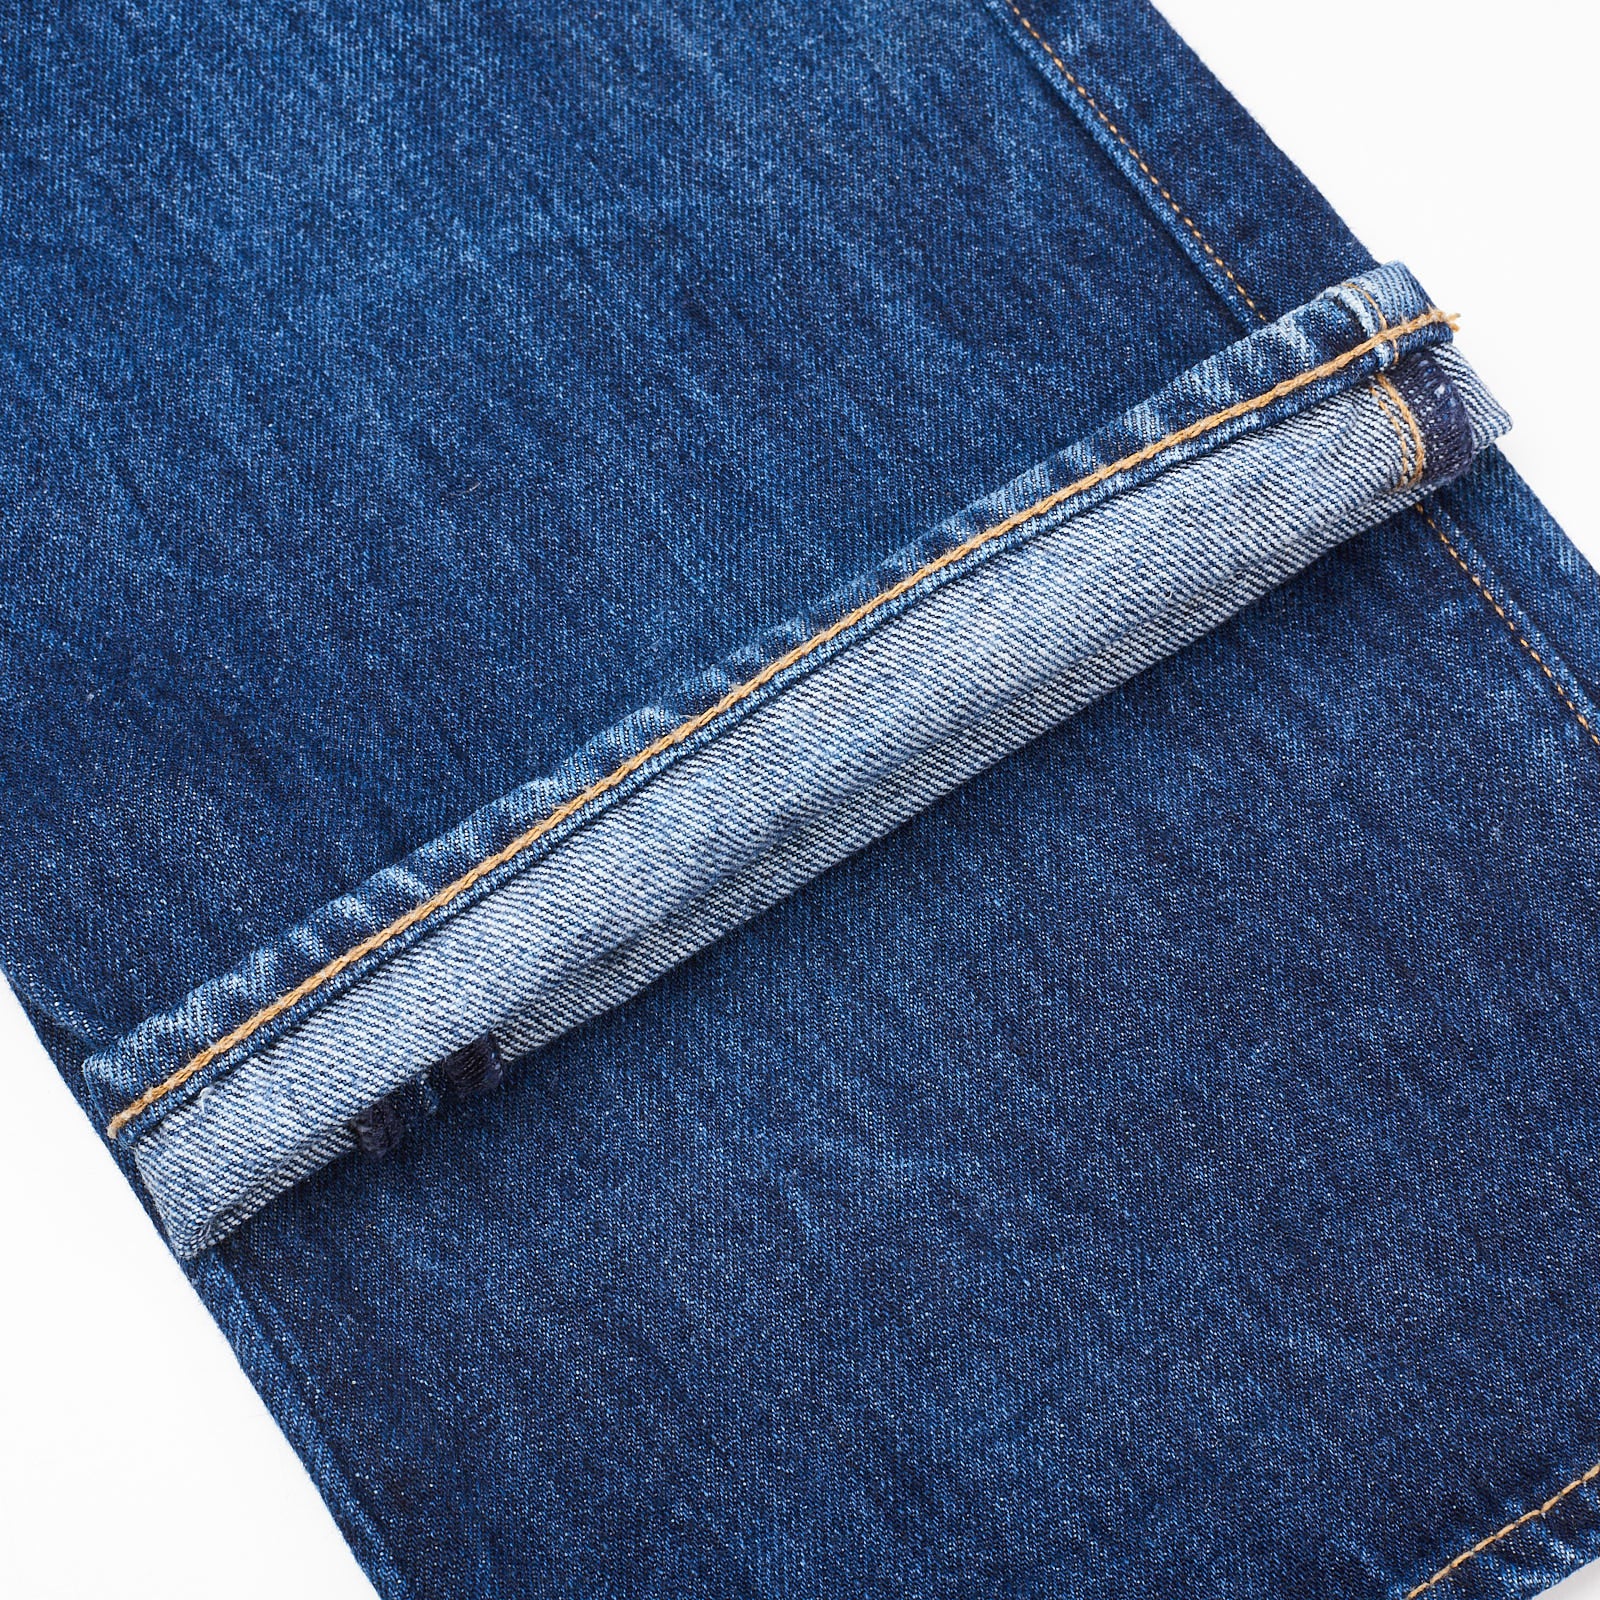 Discontinued Sizes - AA101 - Men's Original Jean | All American Clothing -  All American Clothing Co